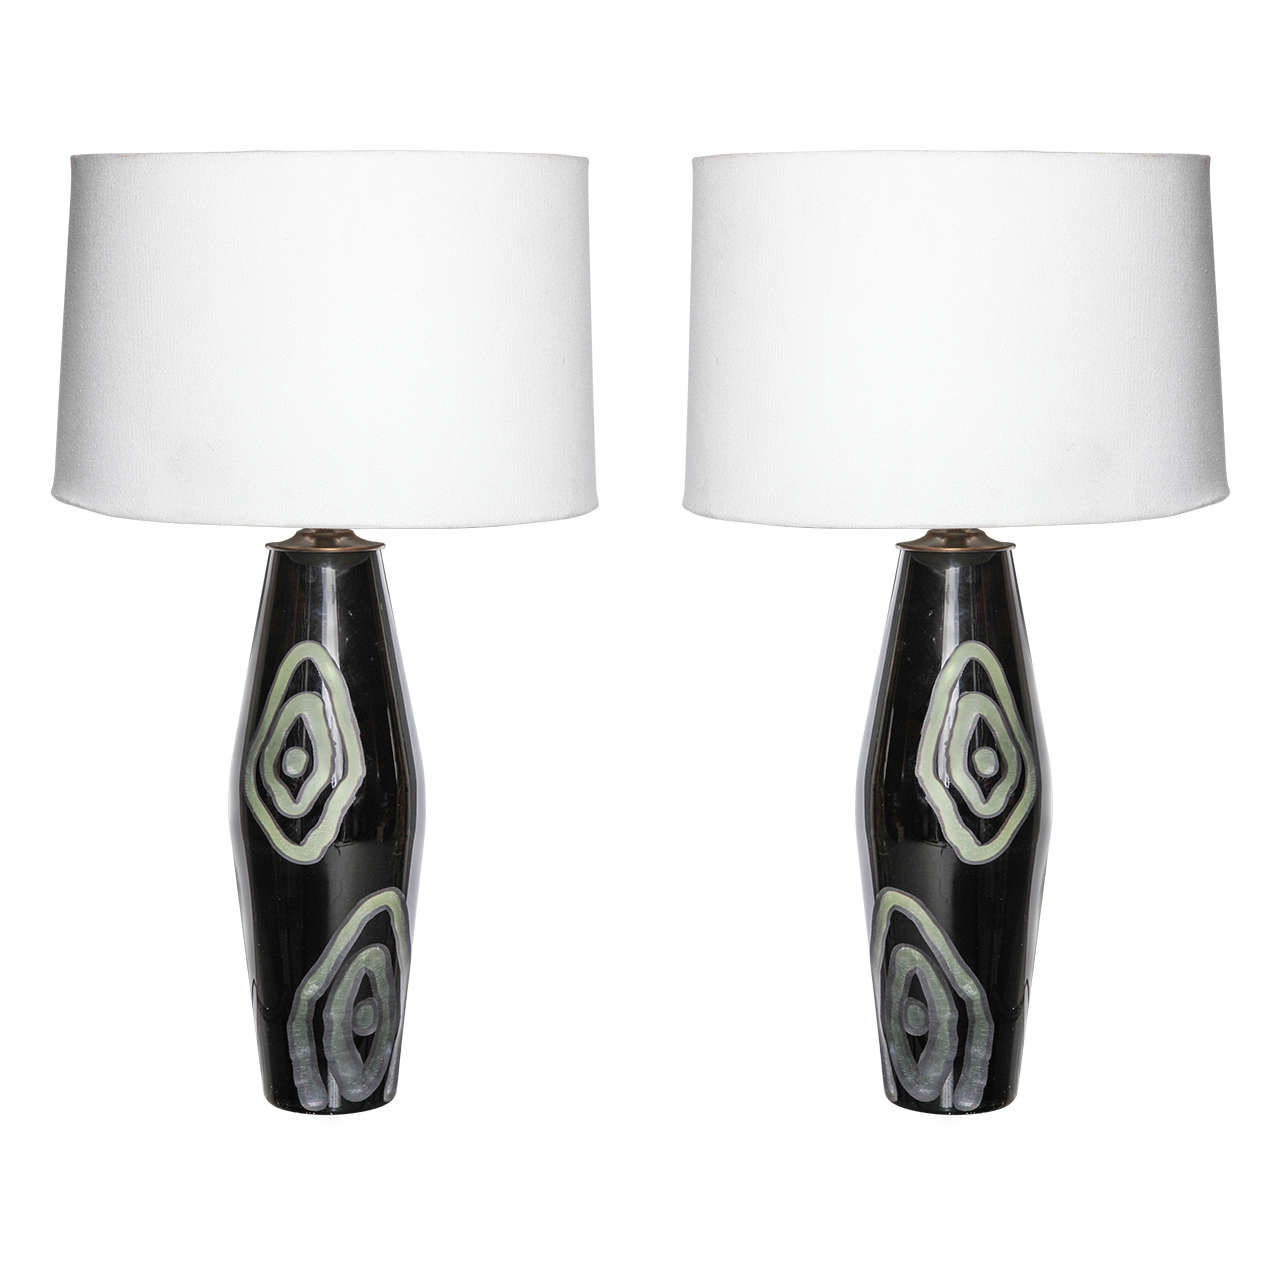 Pair of Etched Black Murano Glass Table Lamps